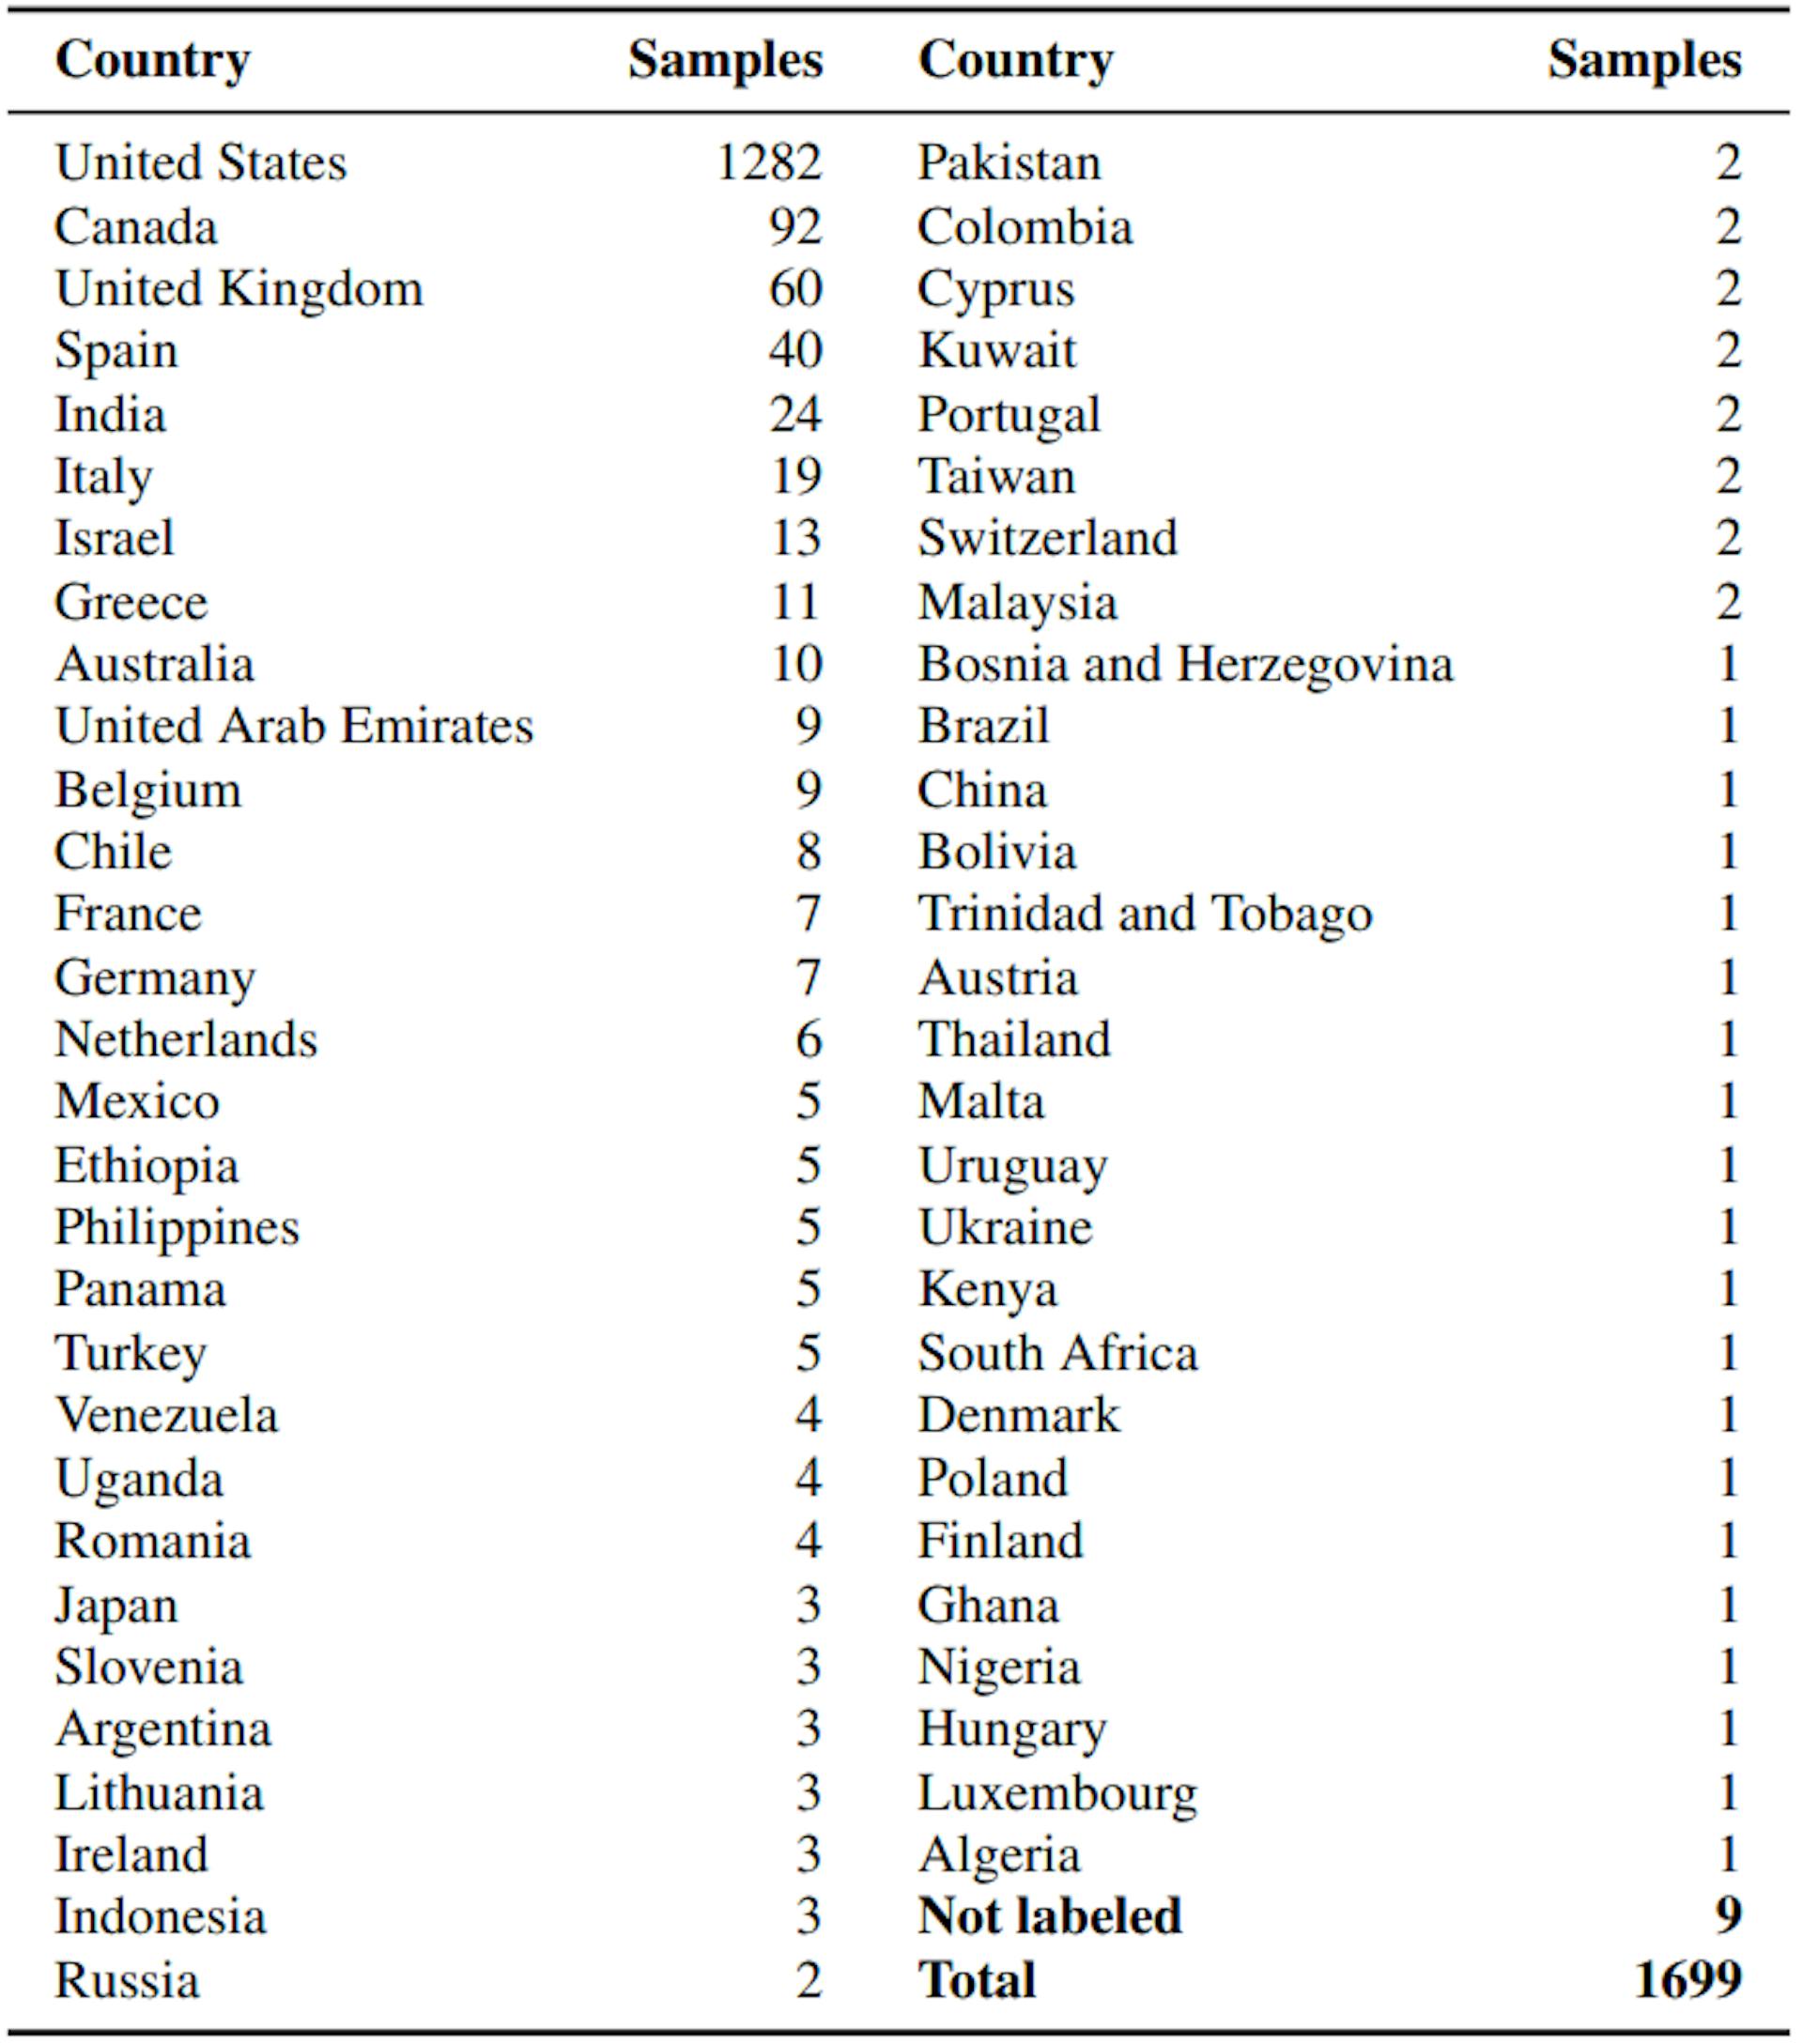 Table 4: Distribution of users in our dataset per country.